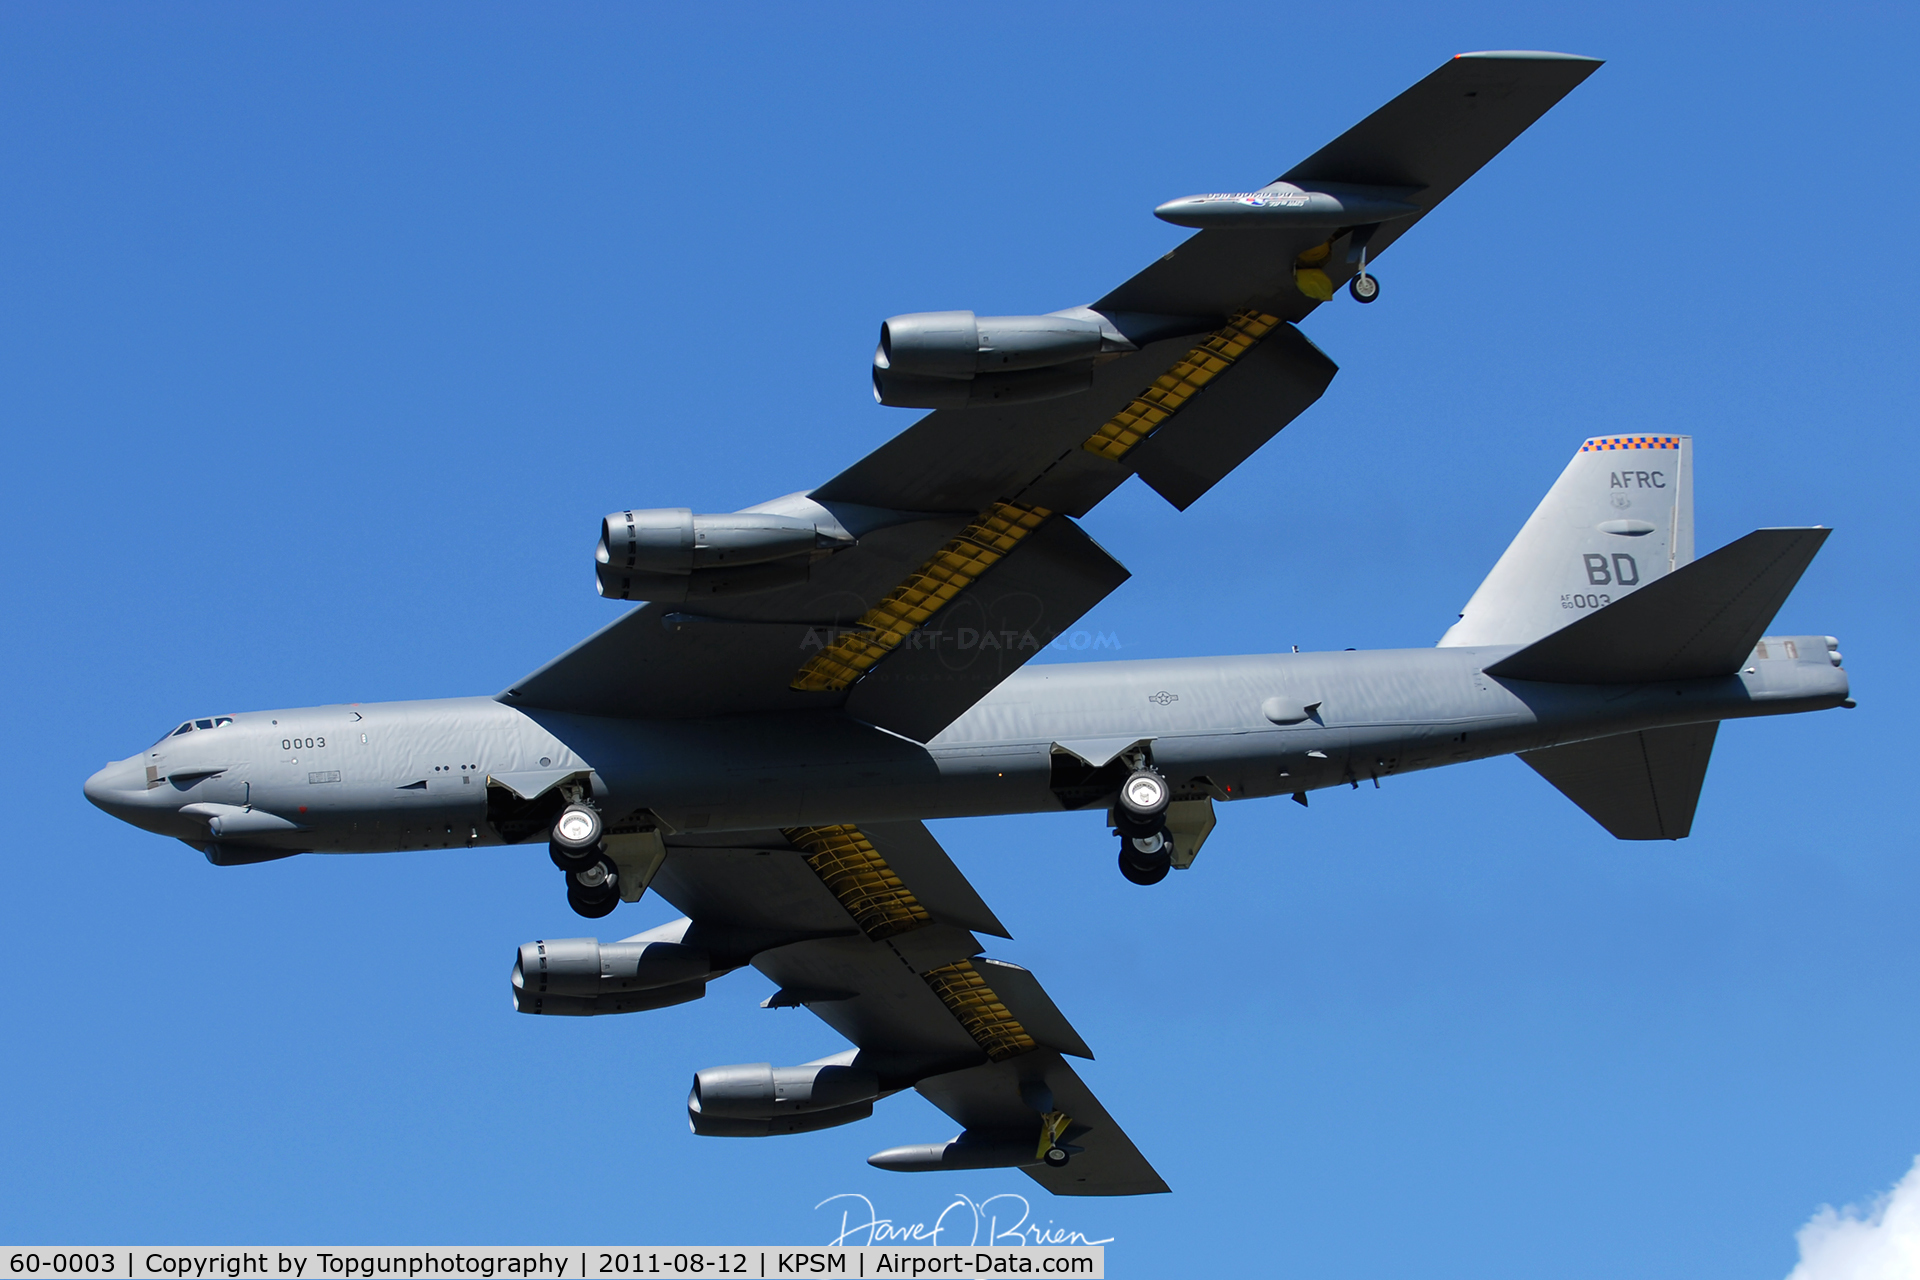 60-0003, 1960 Boeing B-52H Stratofortress C/N 464368, DEATH31 coming in for low approach